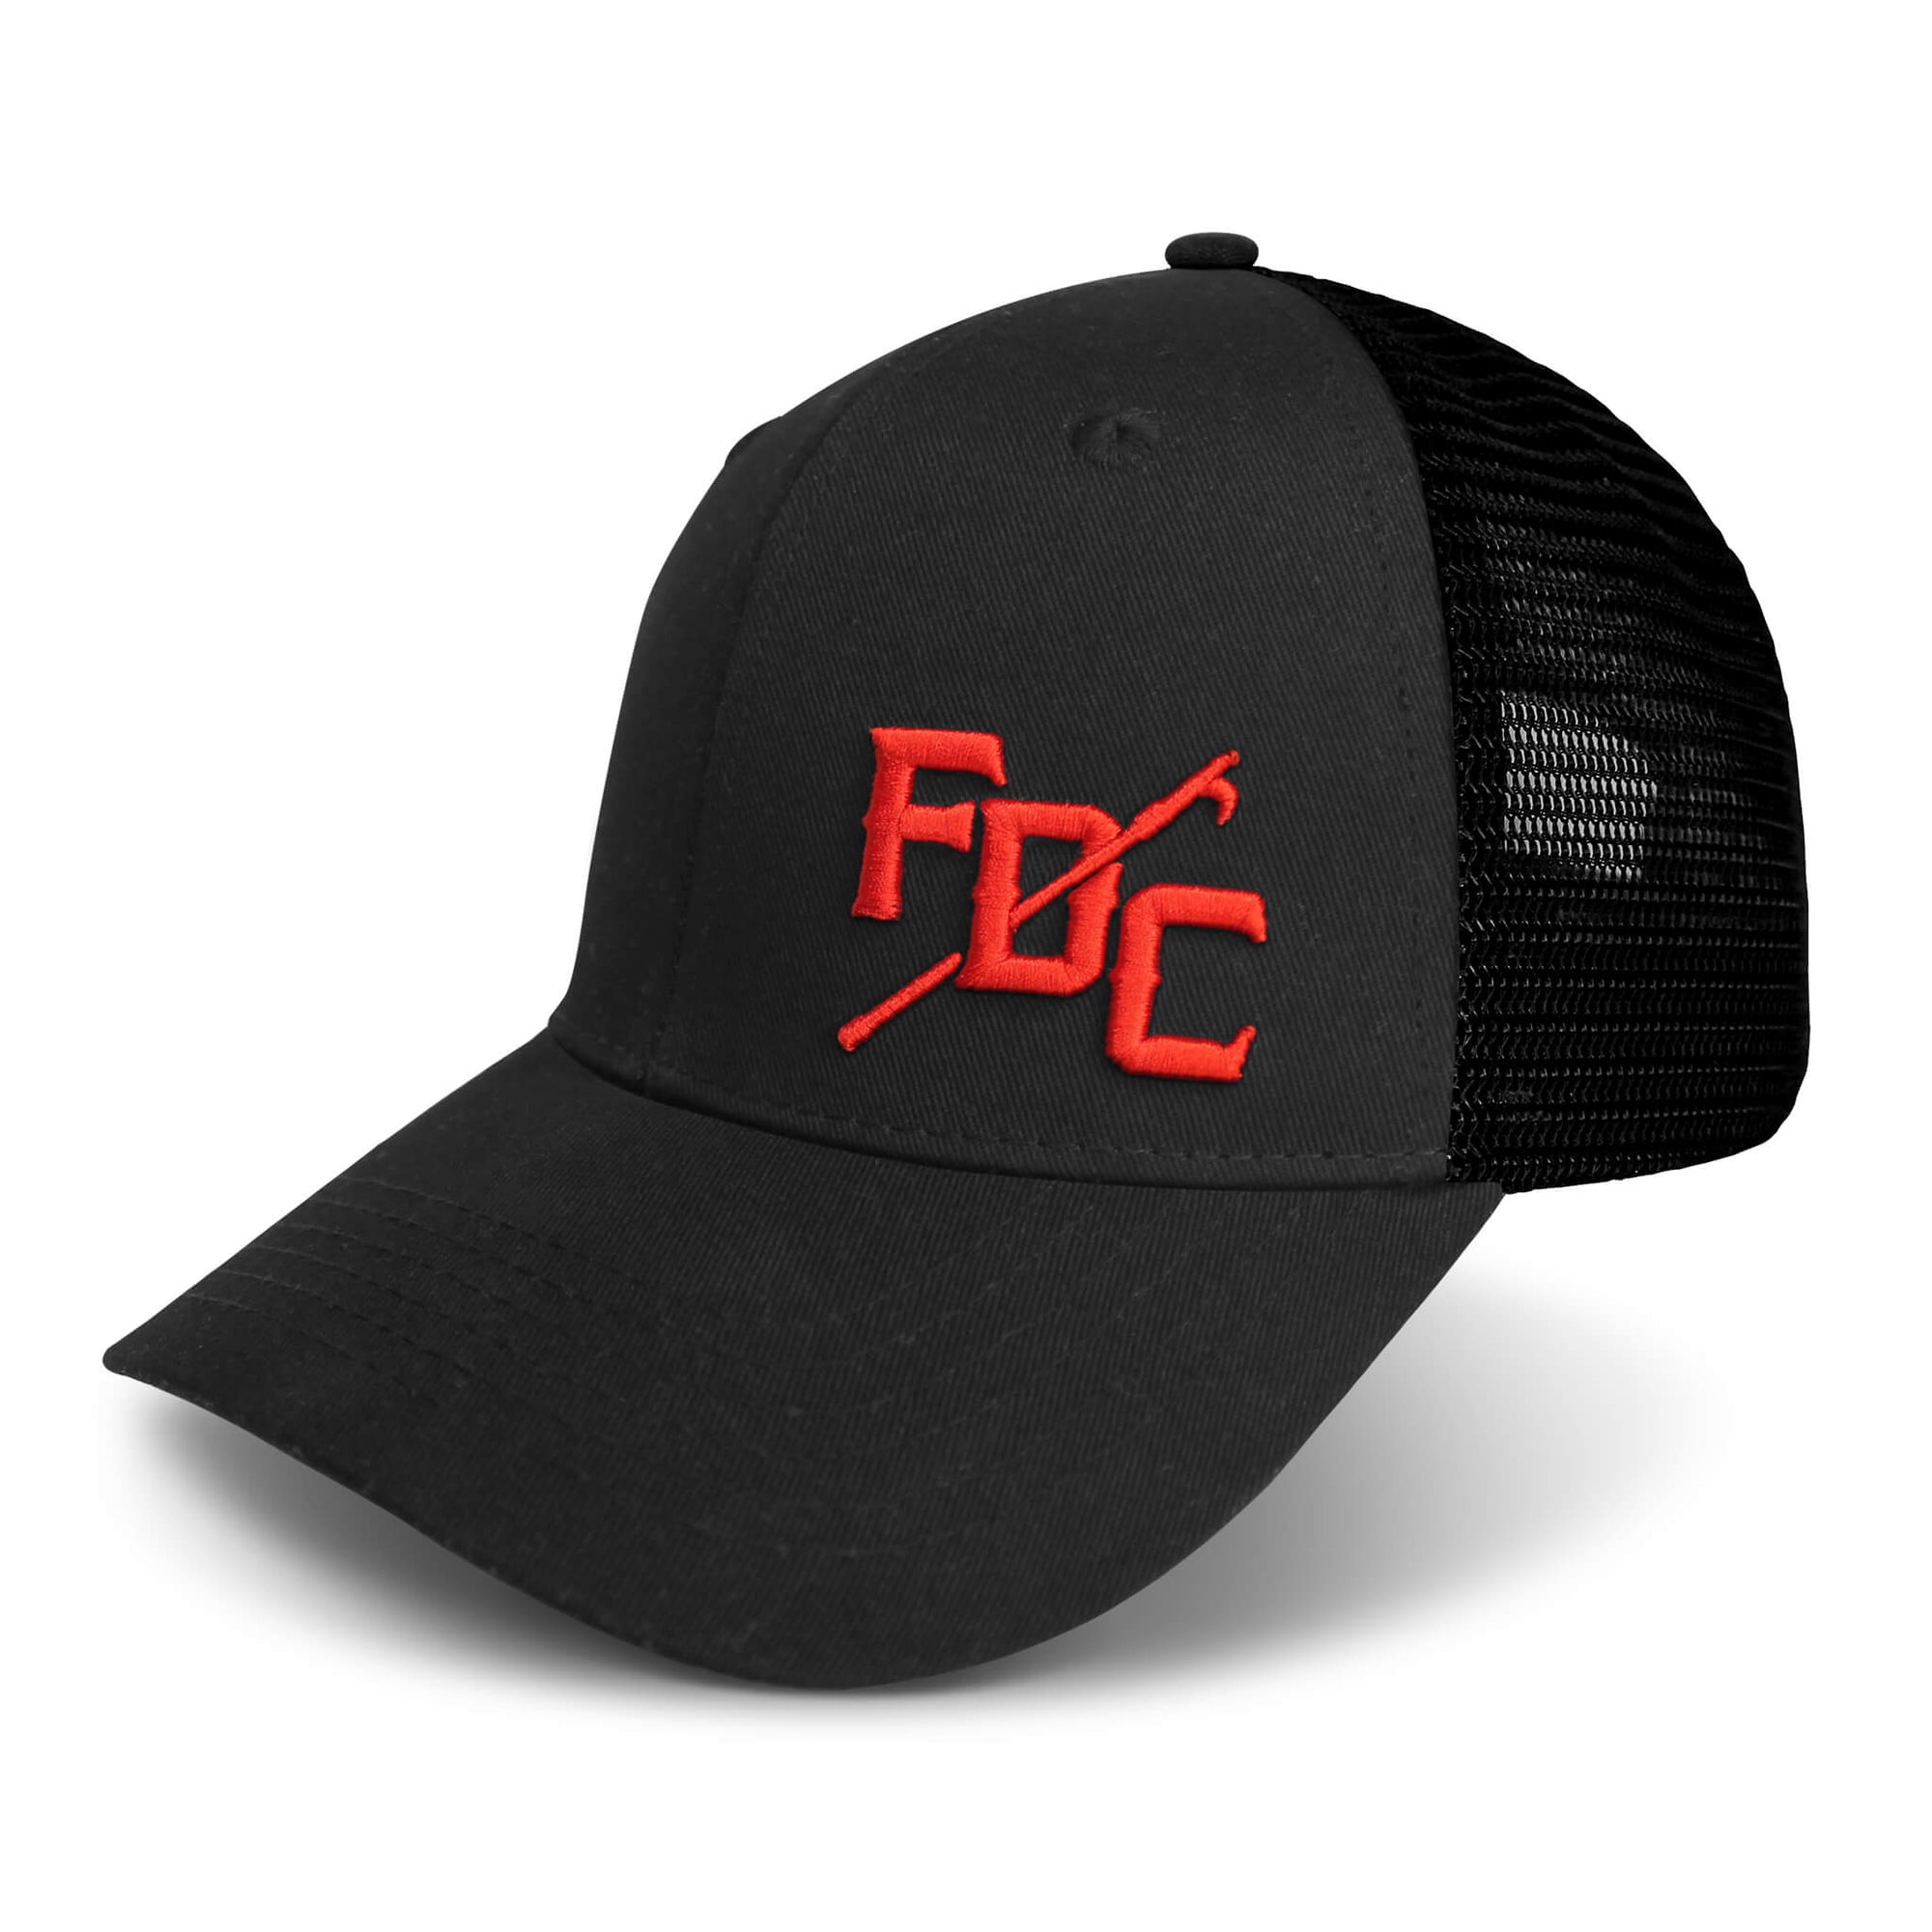 Side view of black hat with mesh back and a red FDC pike pole logo on the front